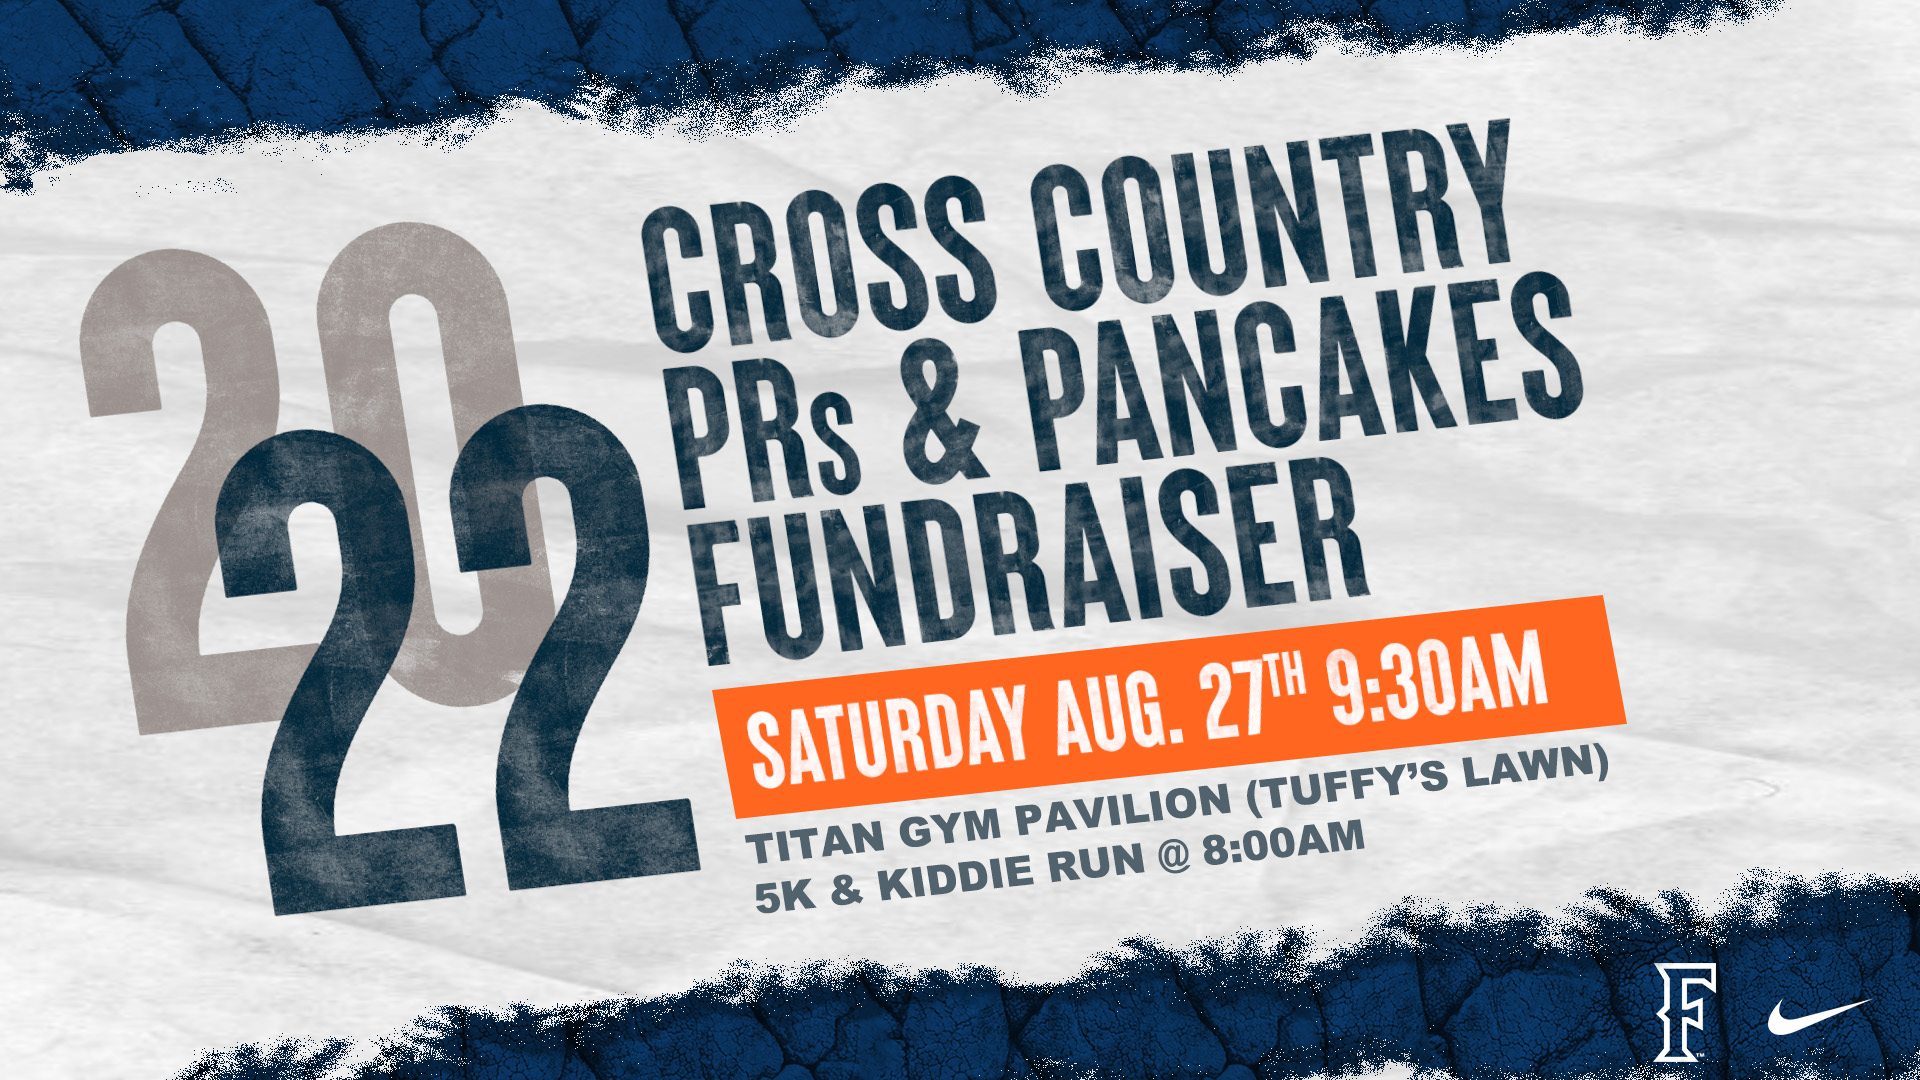 Cross Country PR's and Pancakes Fundraiser. Saturday, August 27th at 9:30 AM.